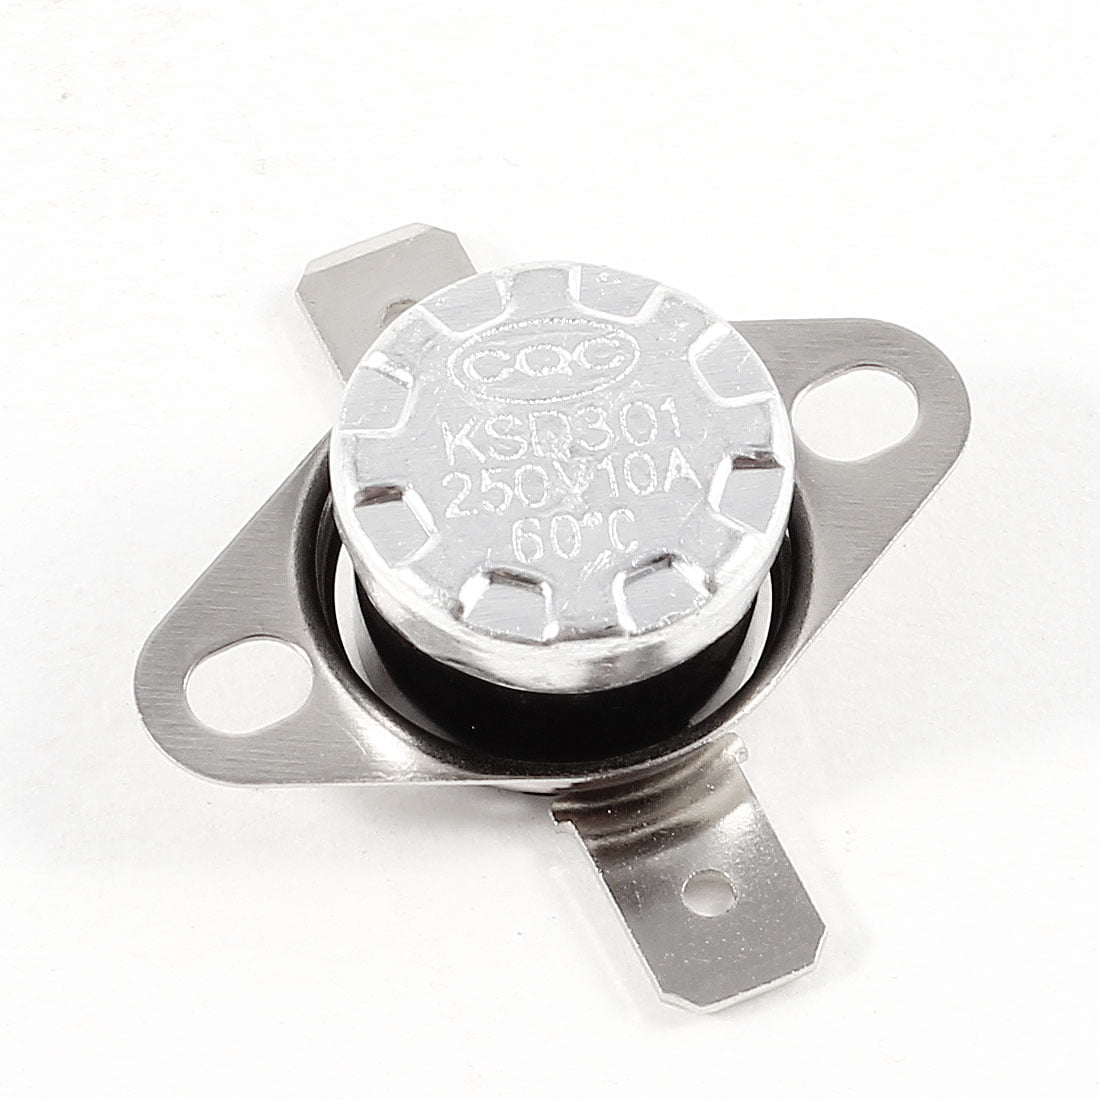 60°C DEGREES 16A AUTO RESET CONTACT TYPE SAFETY CUT OUT THERMOSTAT FOR BOILERS 